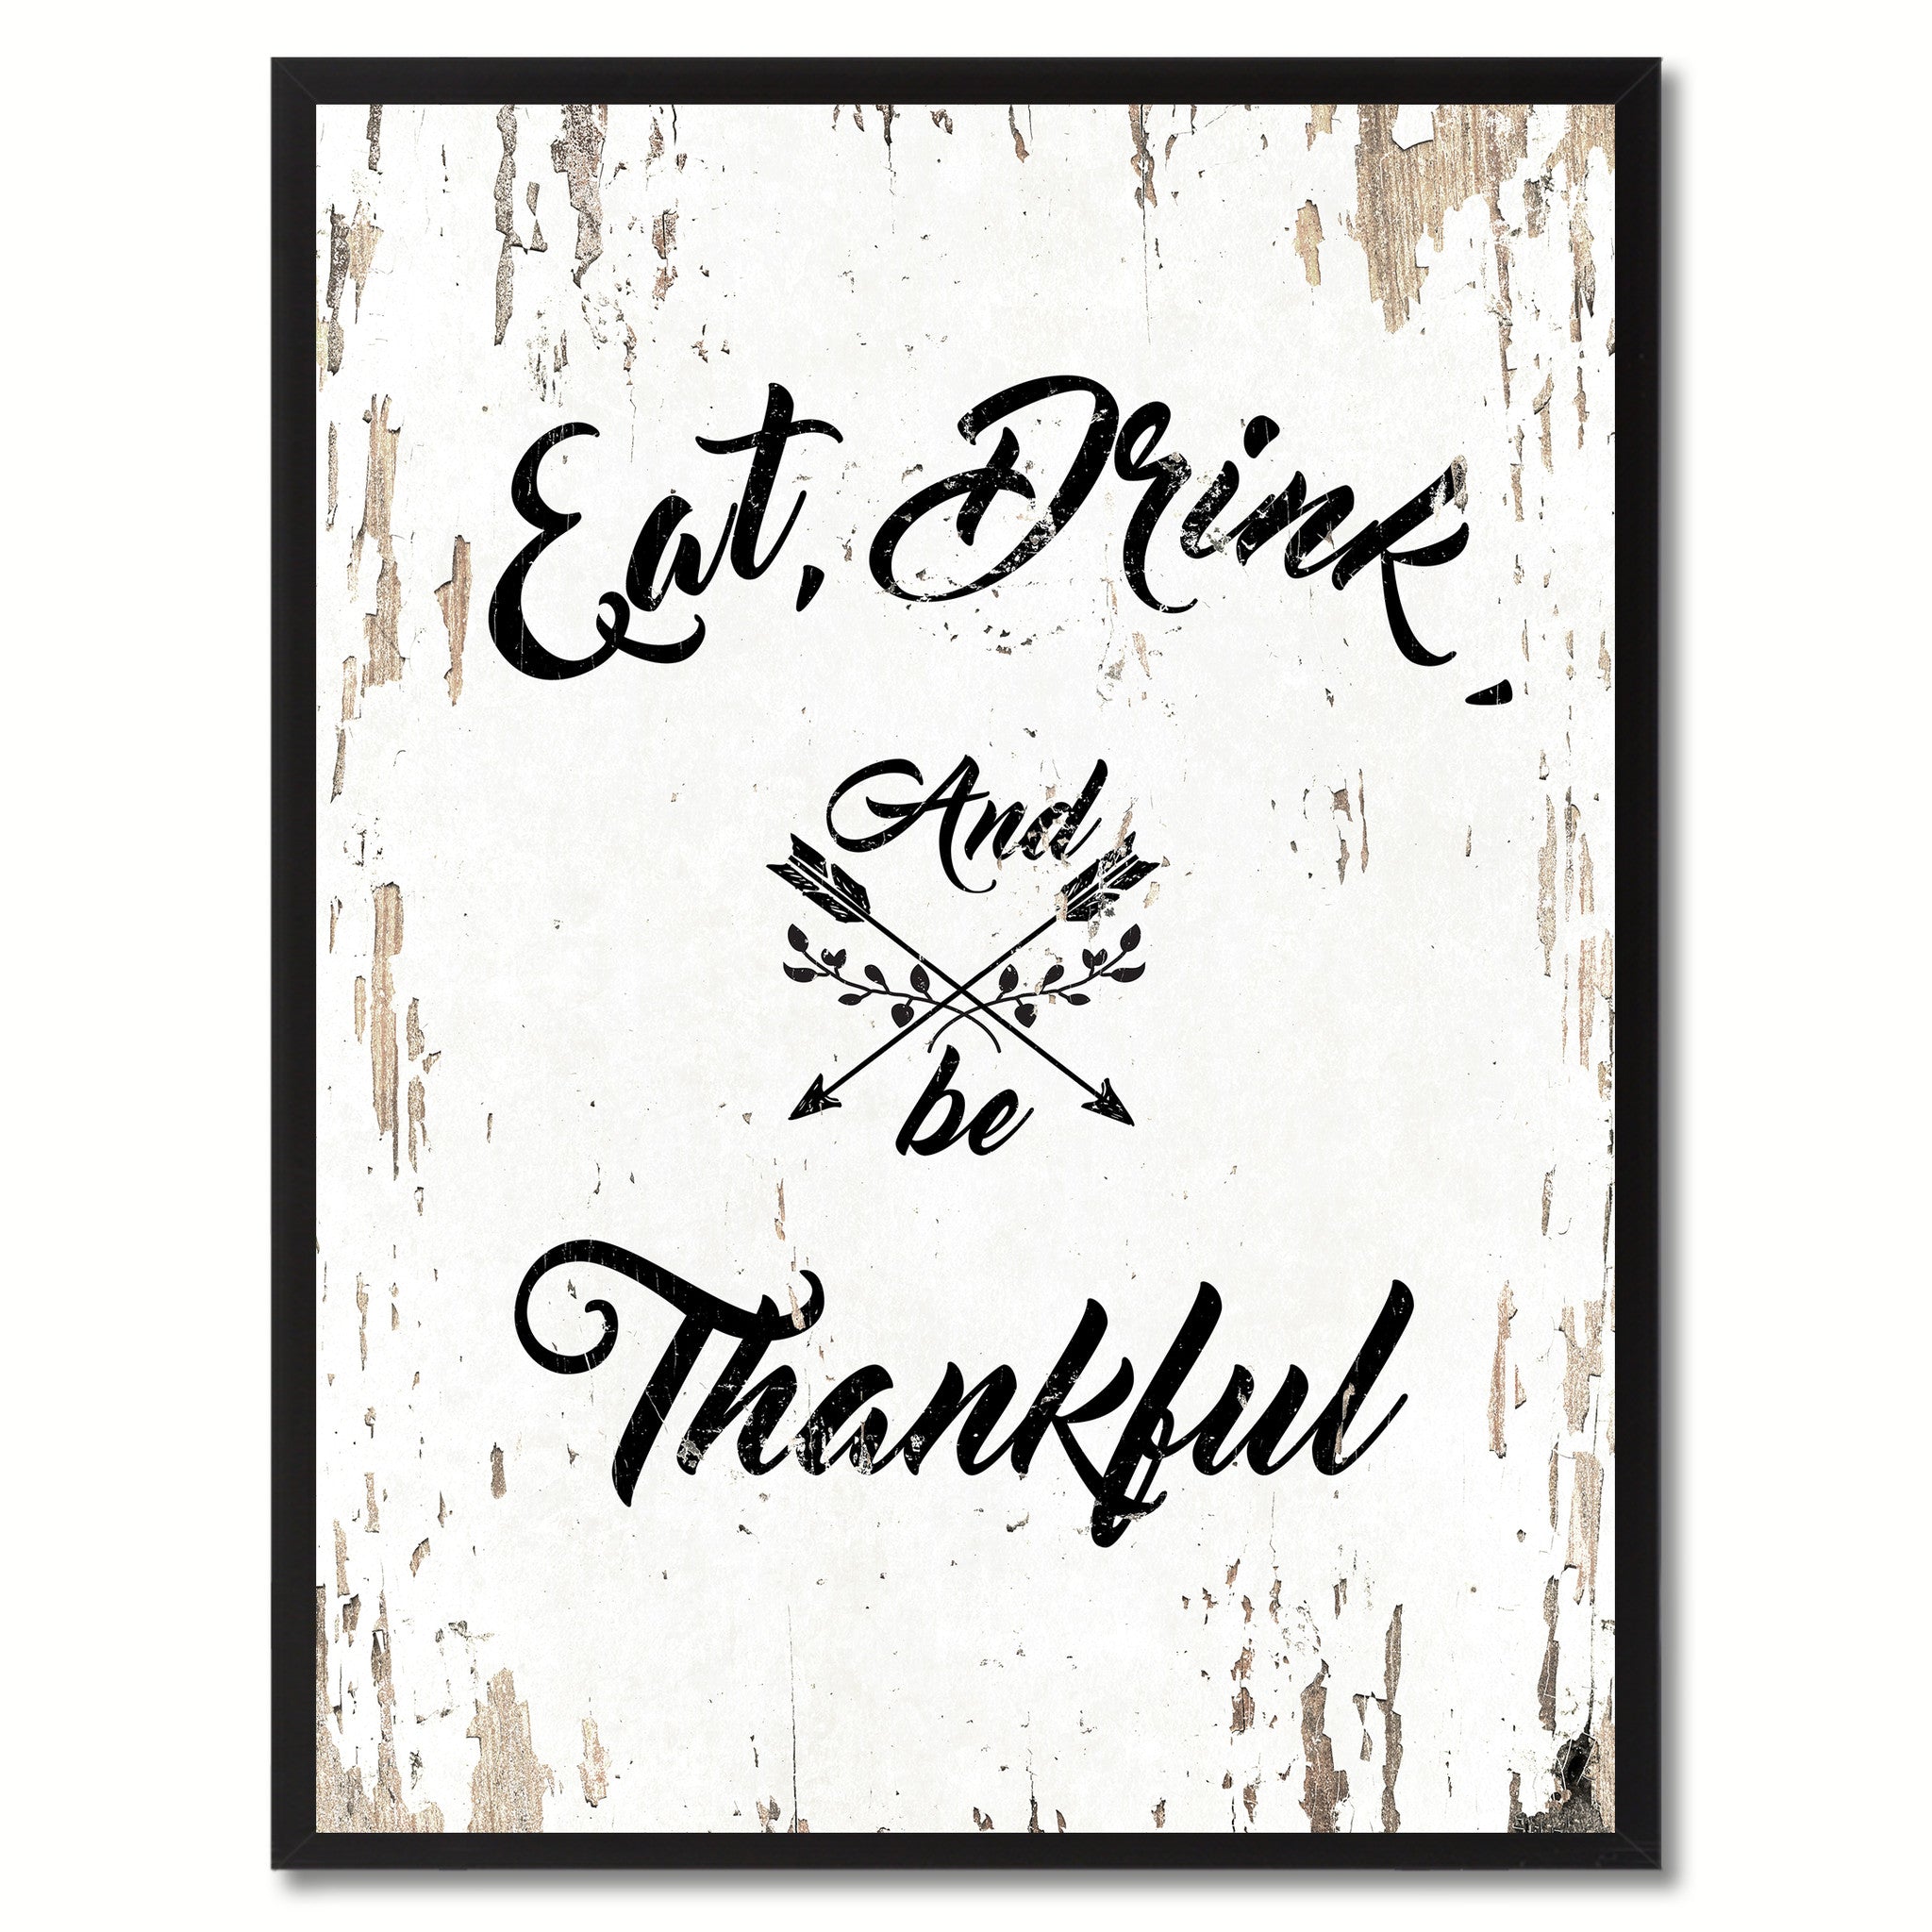 Eat drink & be thankful Happy Quote Saying Gift Ideas Home Decor Wall Art